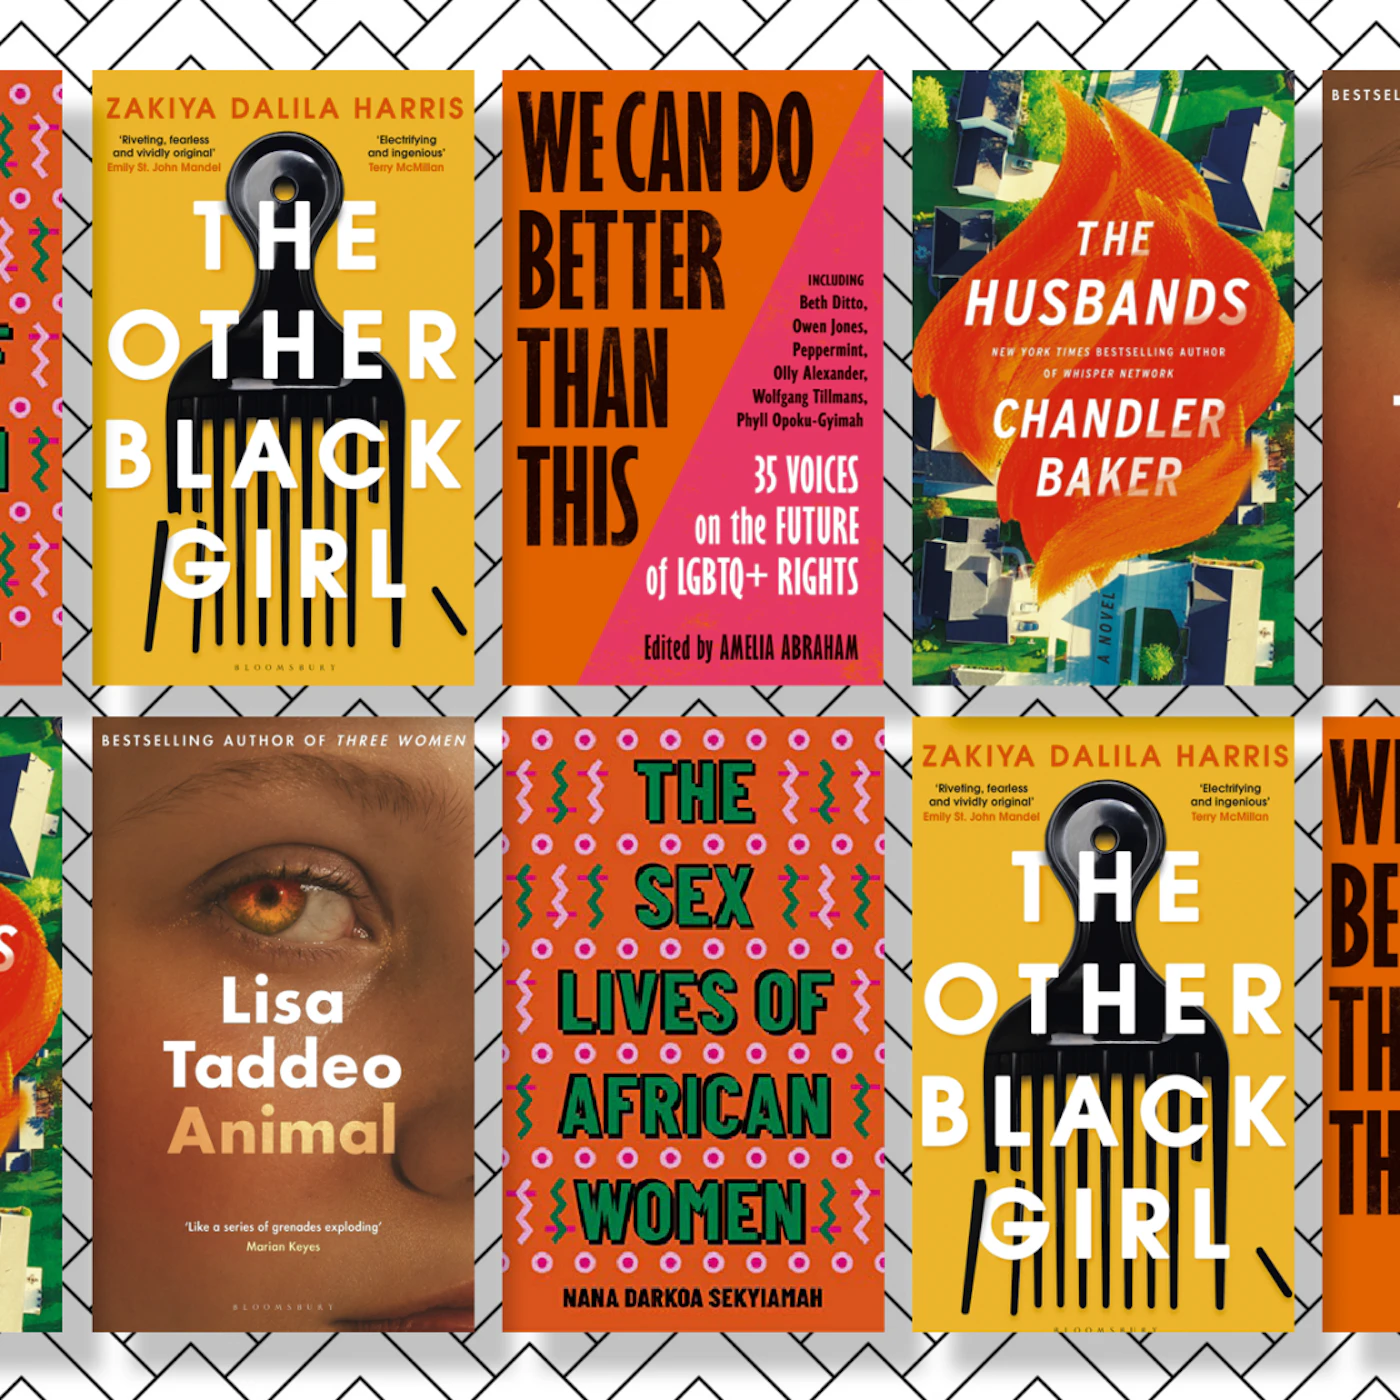 Books to blow your mind from Lisa Taddeo and more